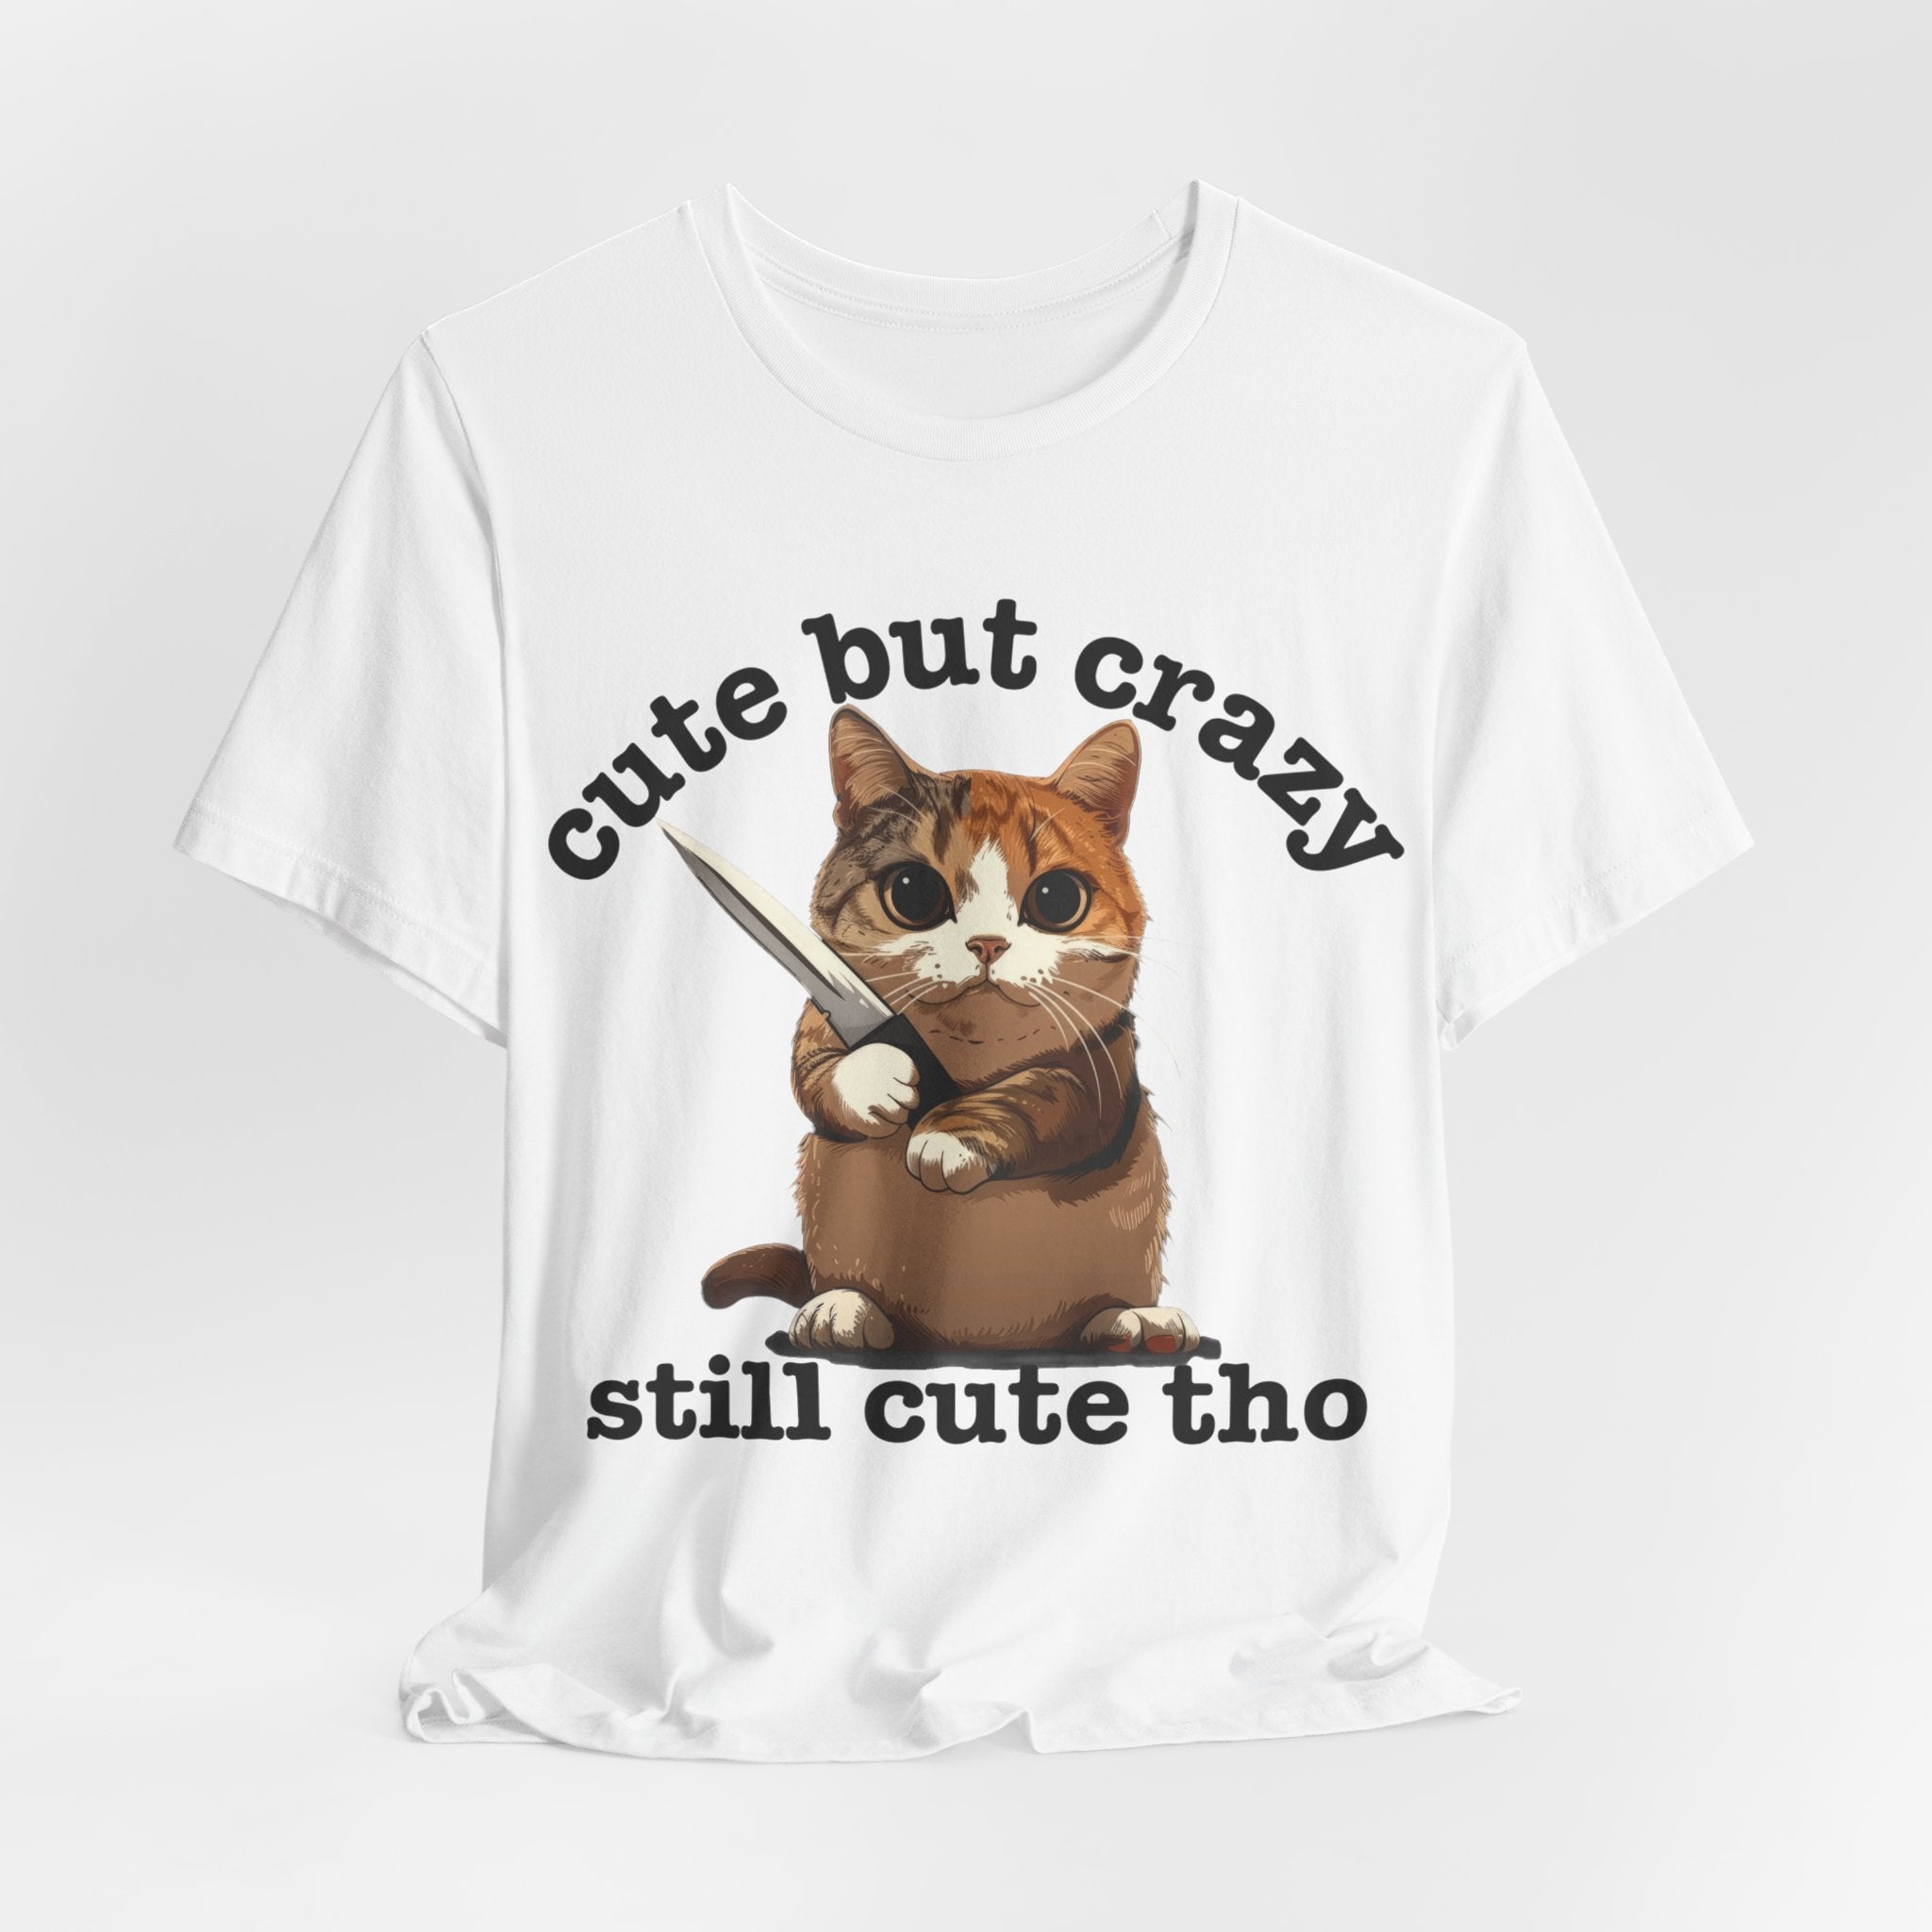 Funny Cat T-Shirt - 'Cute but Crazy, Still Cute Tho' - Whimsical Cat Lover Tee - Perfect Gift for Pet Owners